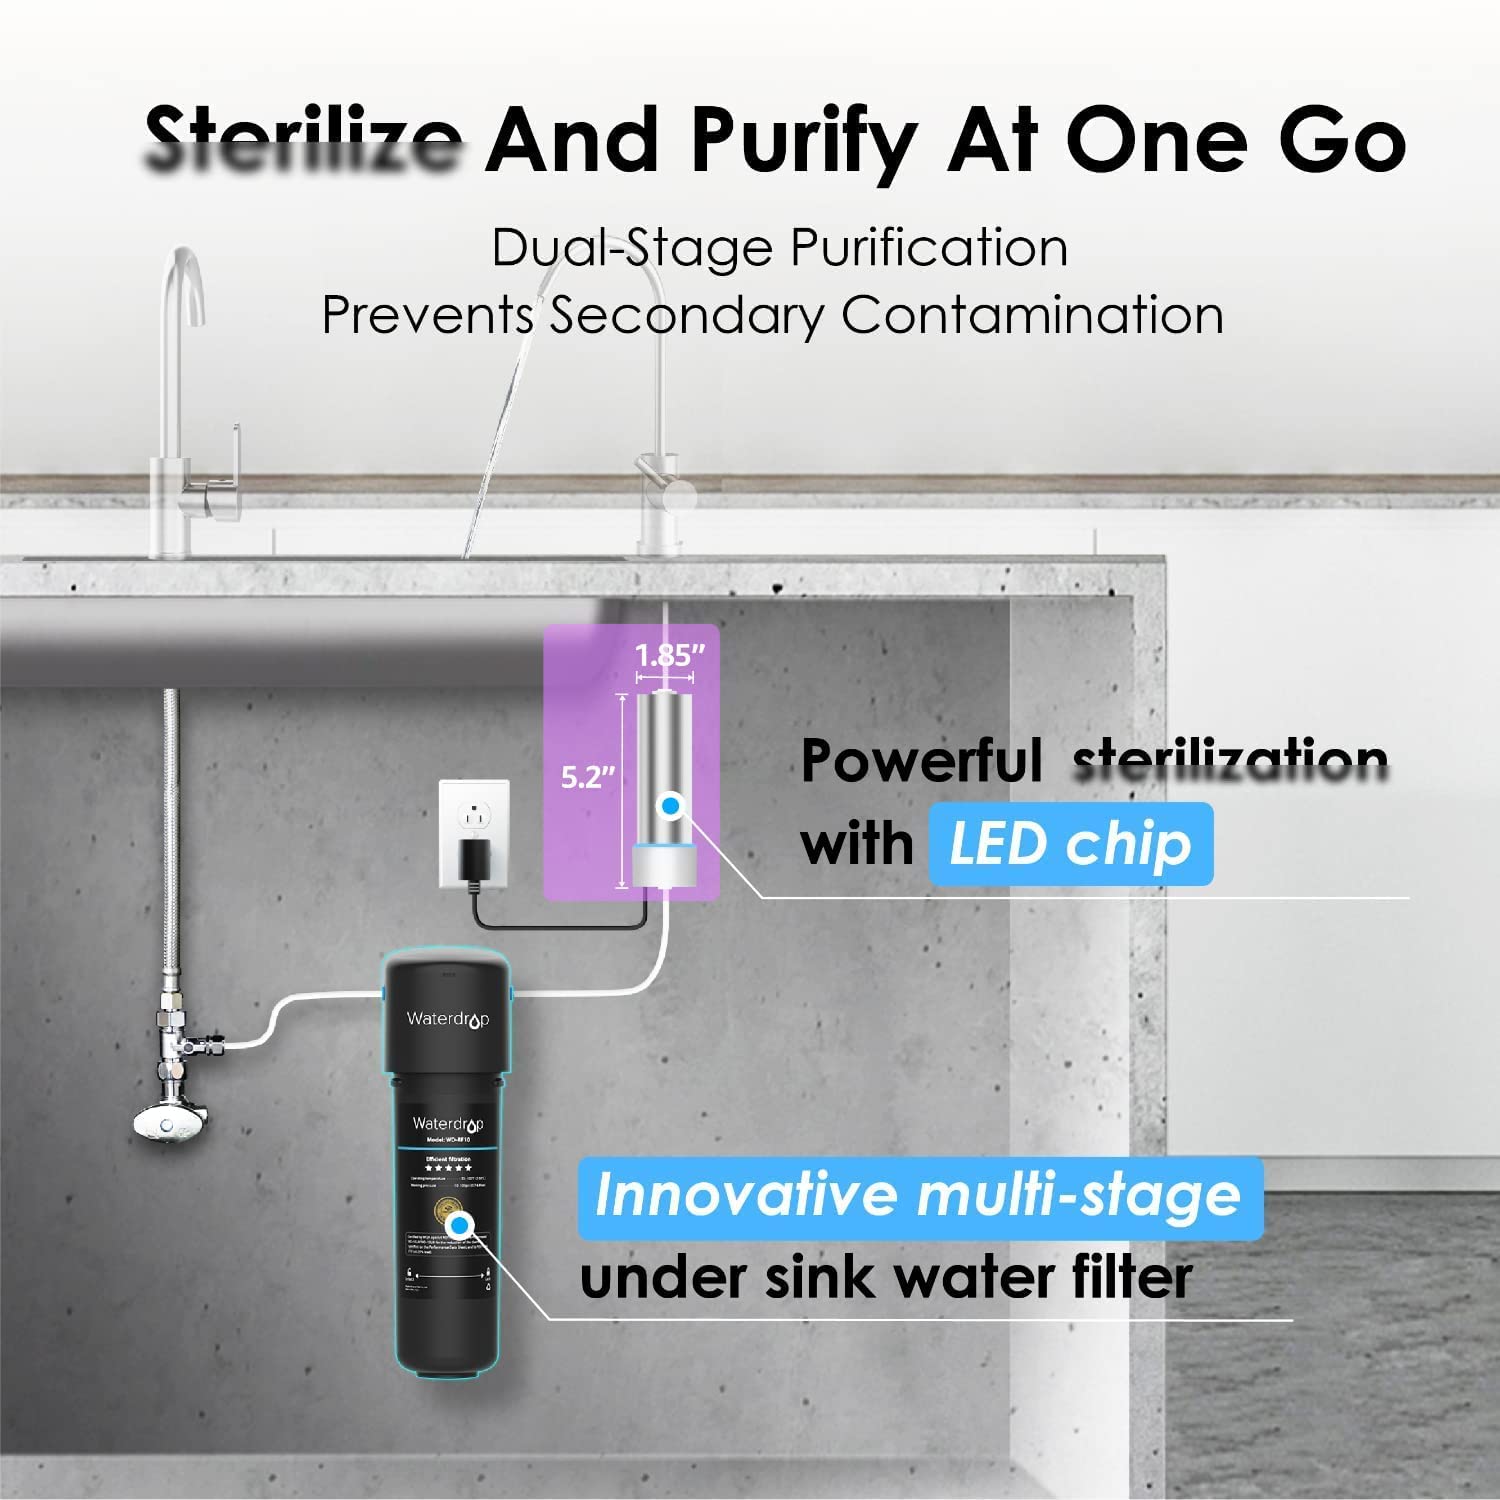 Waterdrop 10UB Under Sink Water Filter System with LED UV͎ Water Sterilizër Filter, Mercury-Free, FCC Certified, Stainless Steel, 50 Years Life Time, Smart Indicator